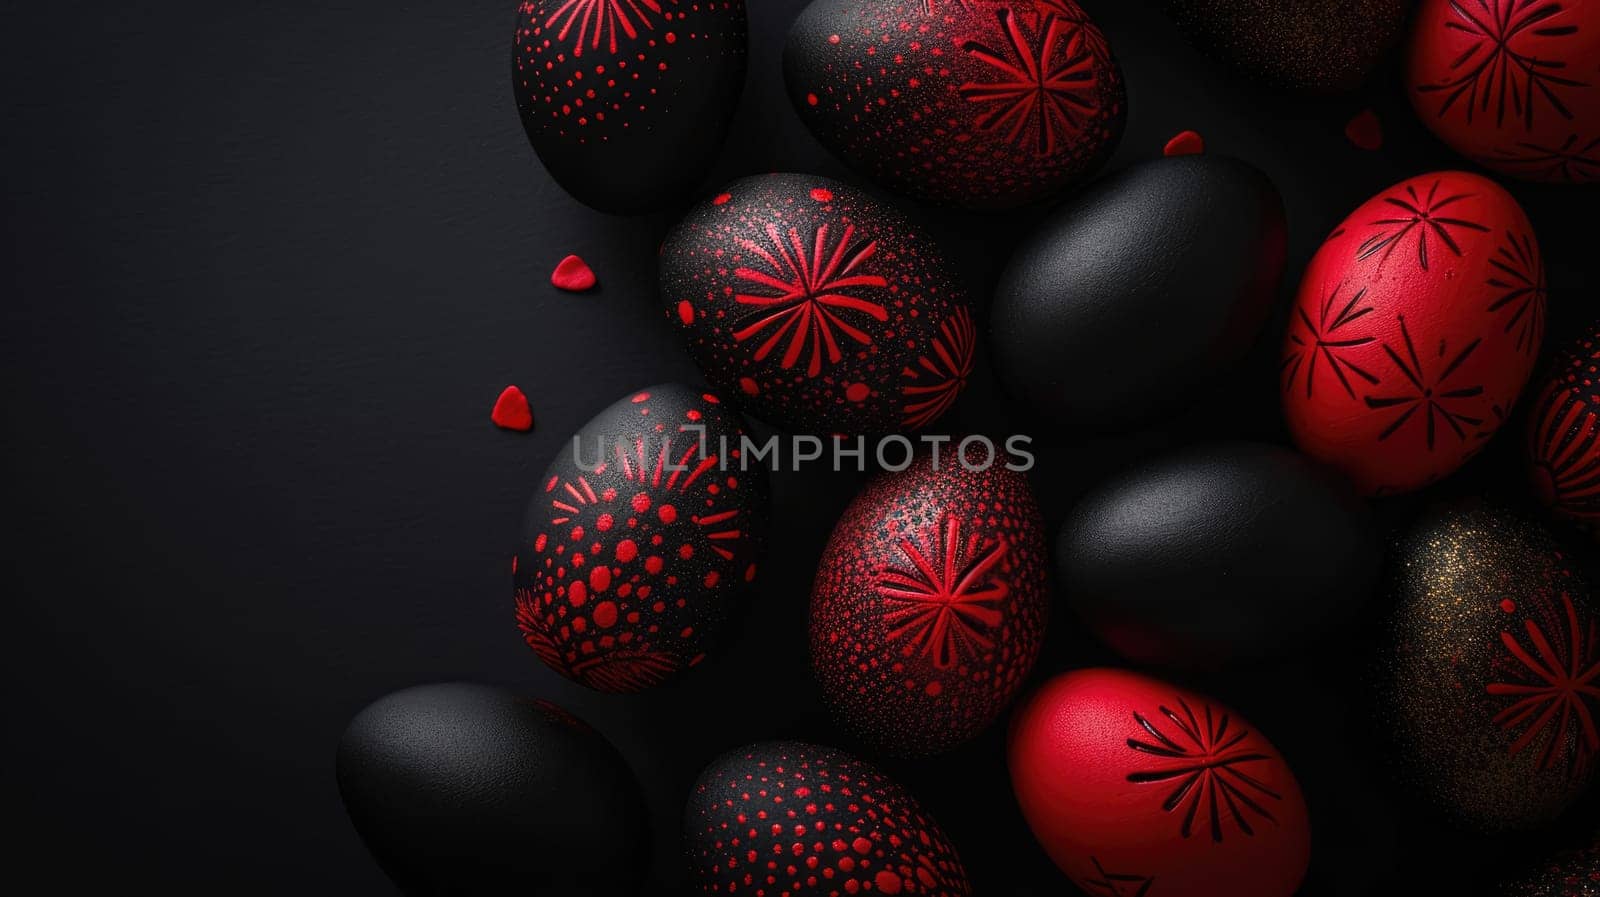 Red and black Easter Eggs on dark Background. Happy Easter eggs by JuliaDorian